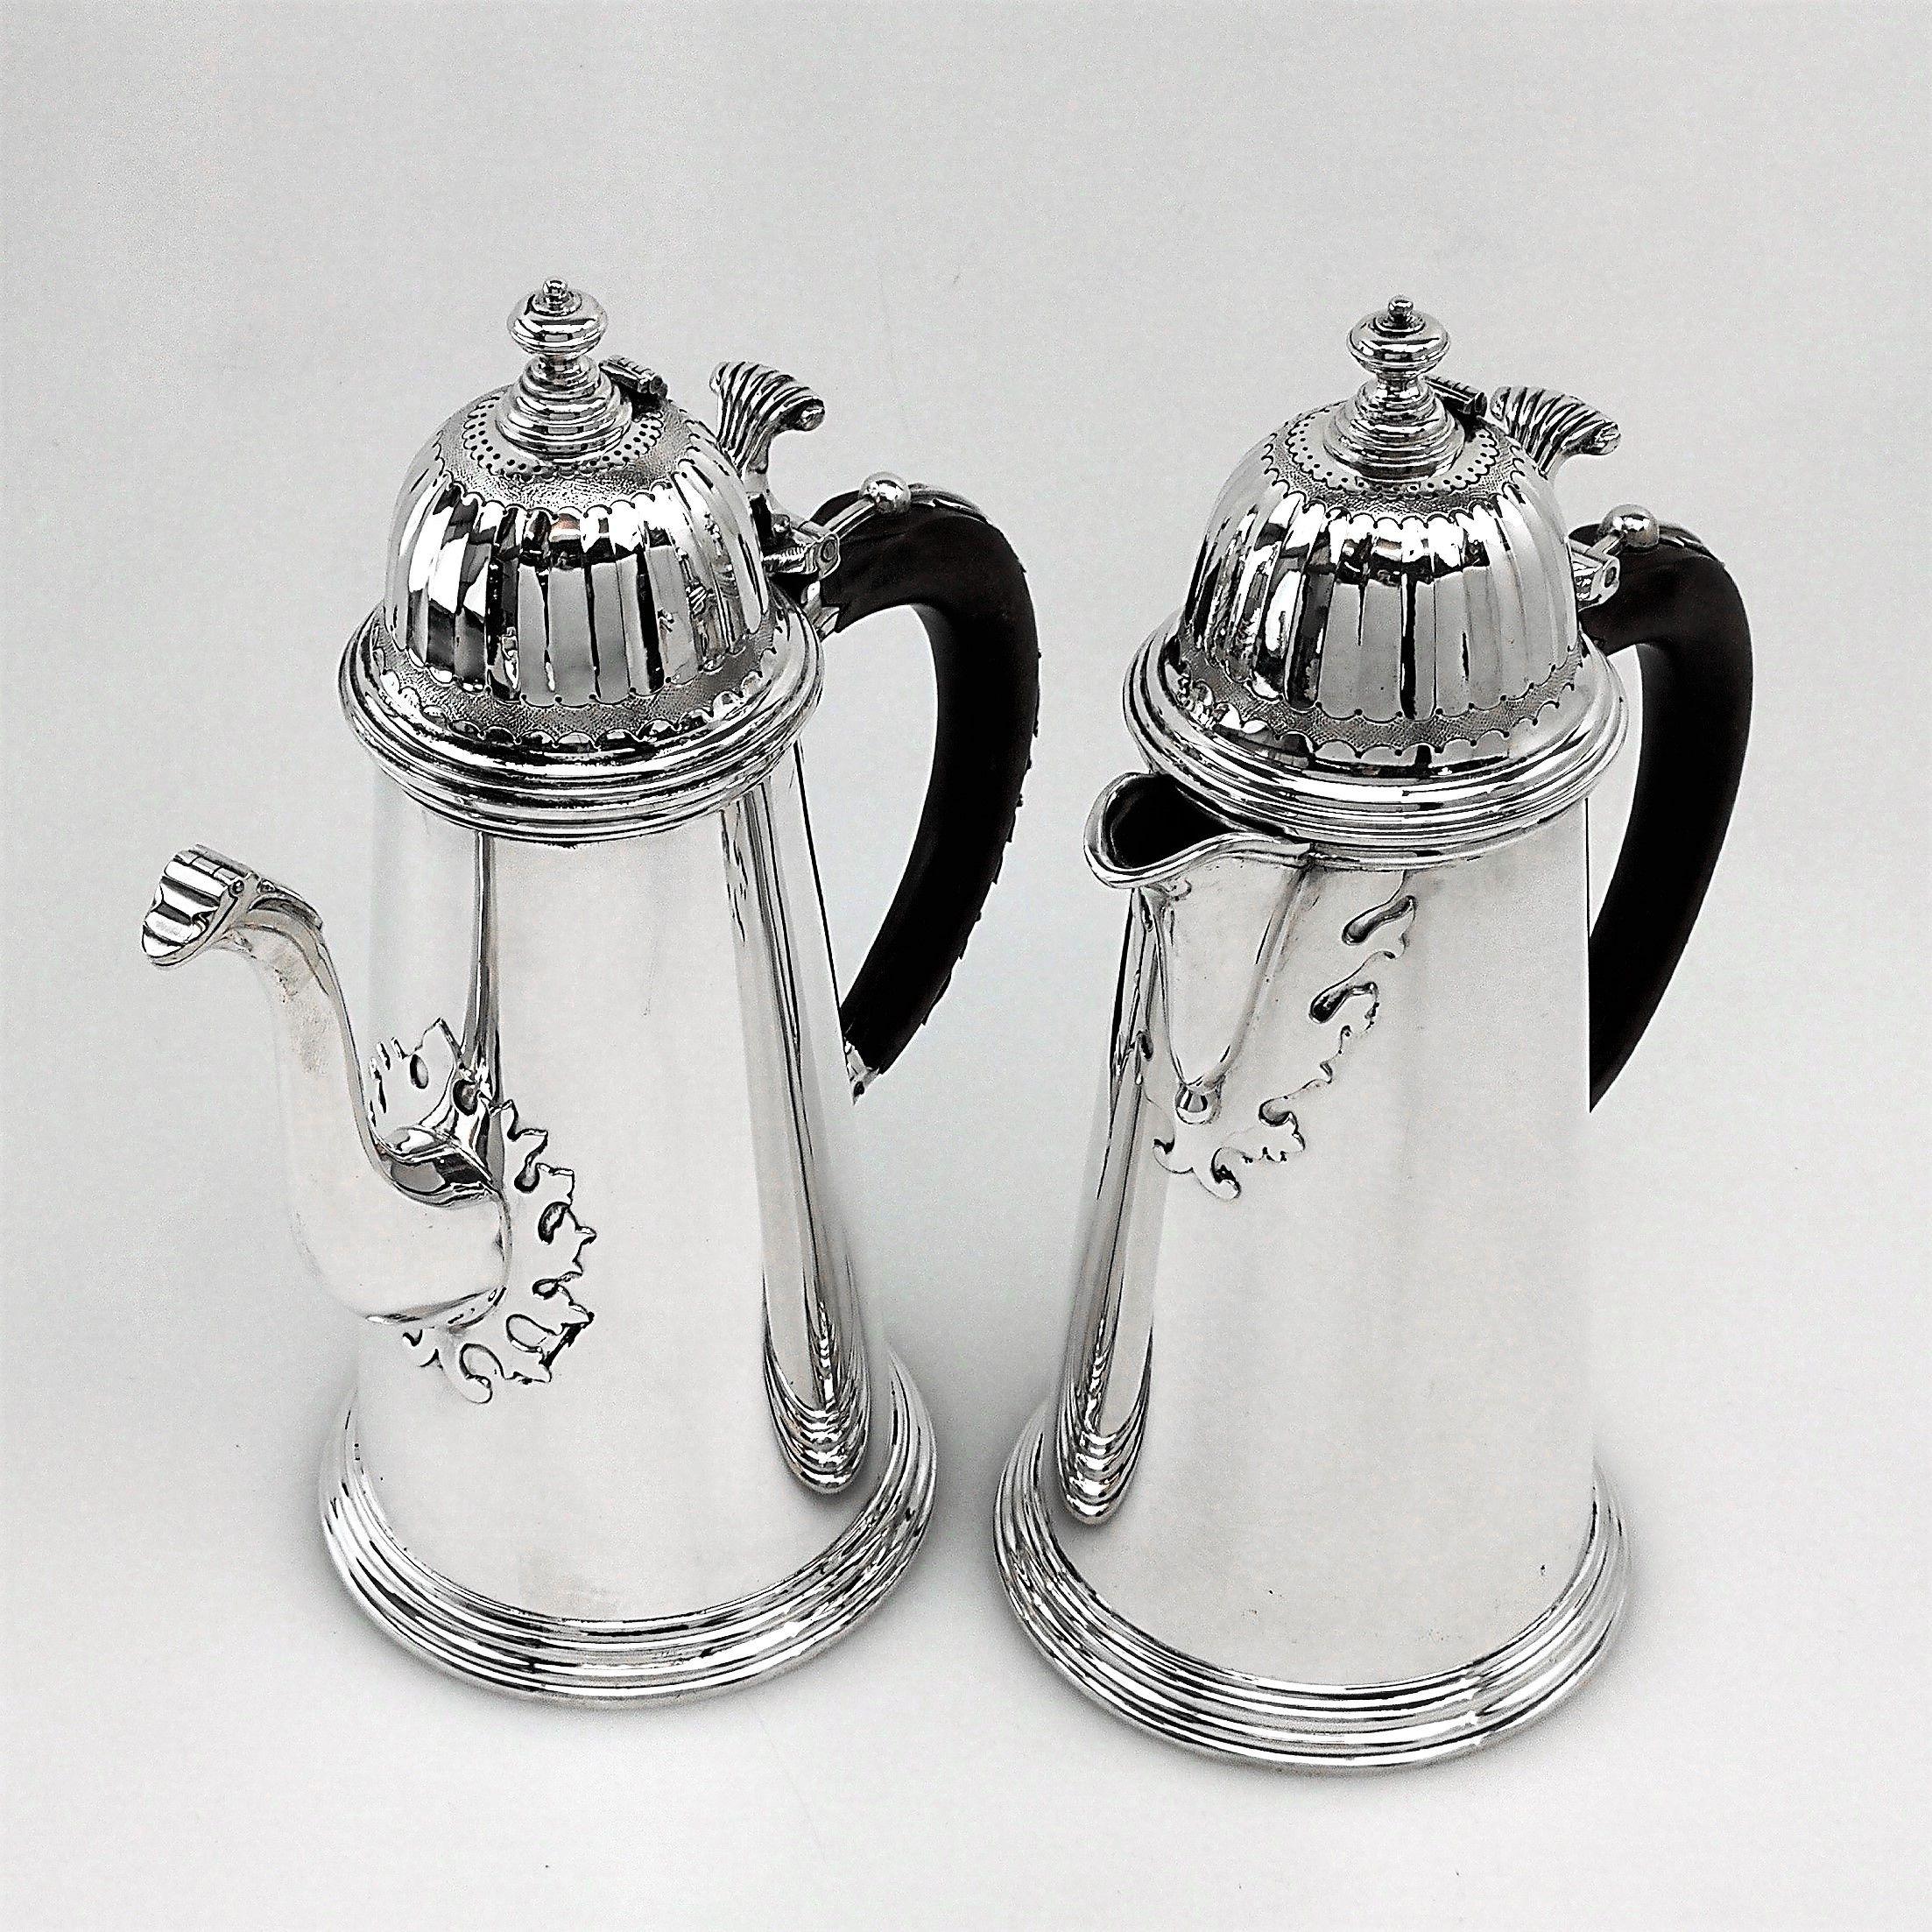 An exceptional vintage sterling Silver Tea and Coffee set designed after the Queen Anne era William Lukin Tea Sets of the same style. This Tea Set comprises of a Teapot, Coffee Pot, hot Water Jug, Sugar Bowl Jug. The teapot, coffee pot & hot water